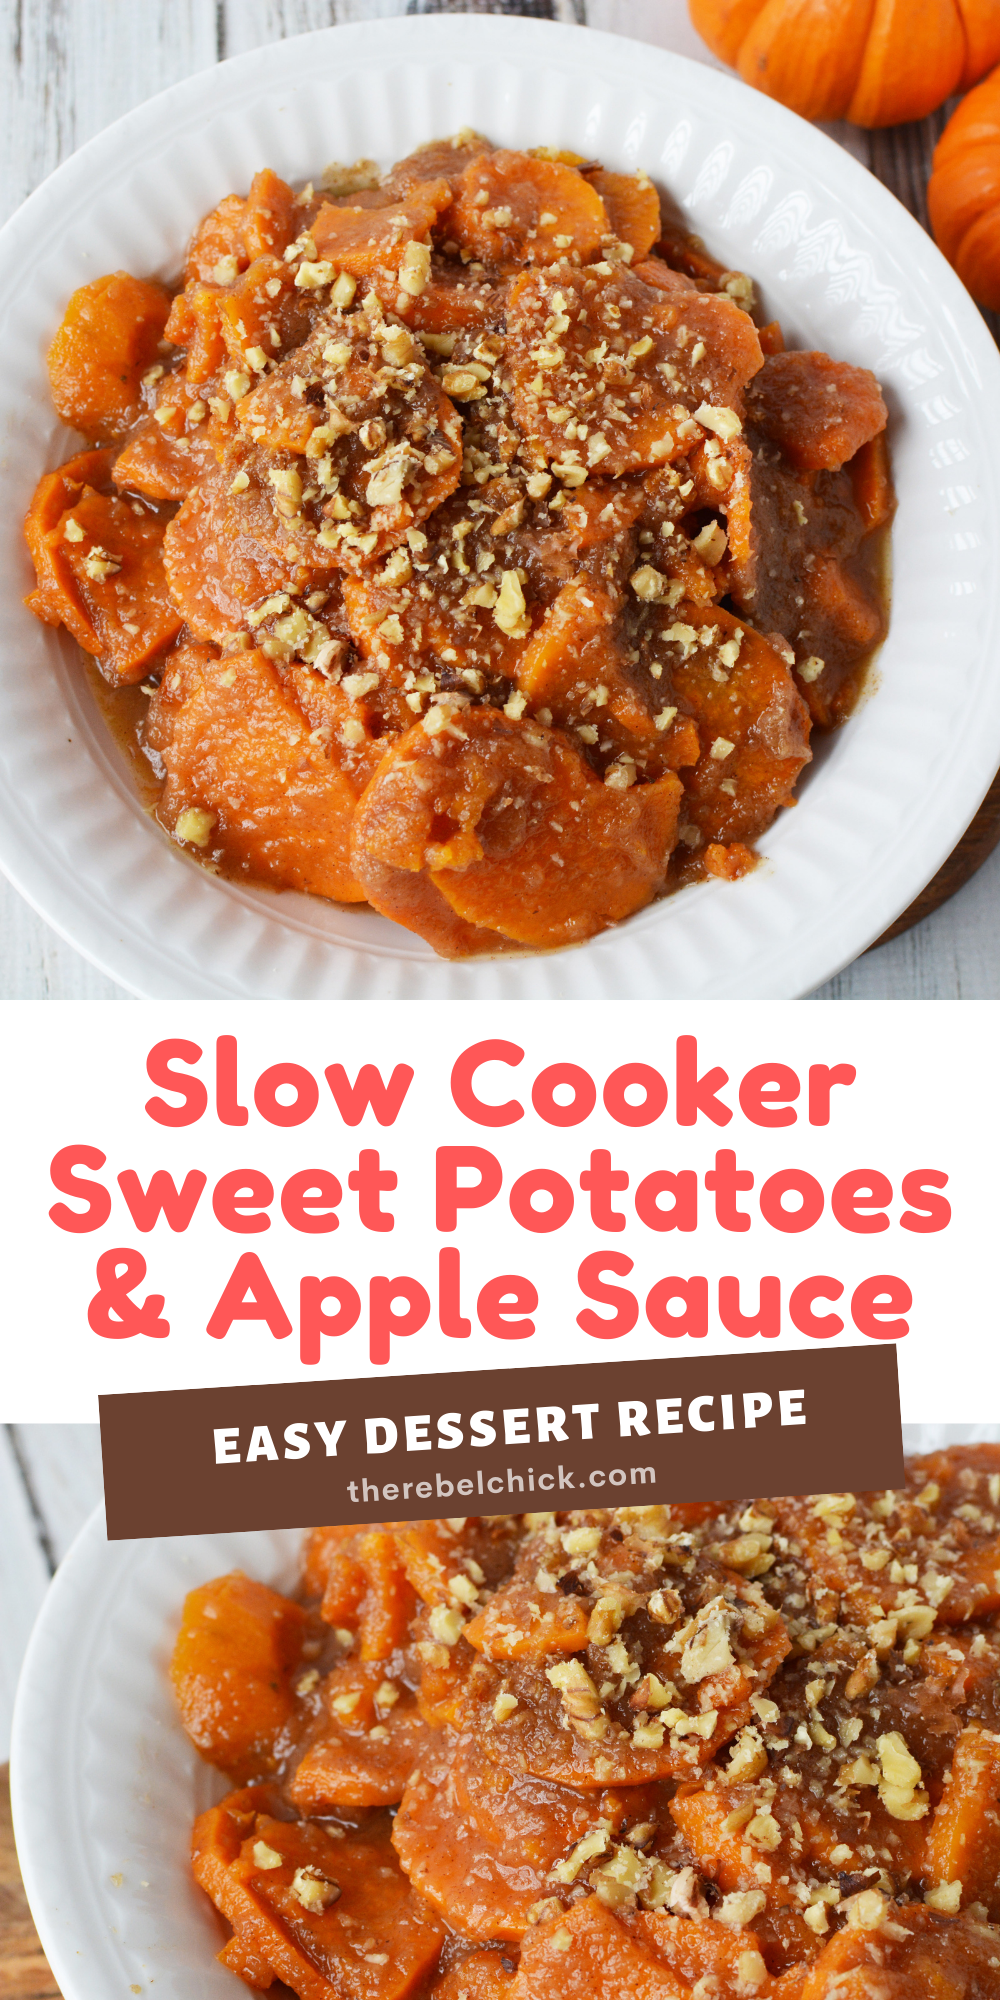 Slow Cooker Sweet Potatoes and Apple Sauce Recipe